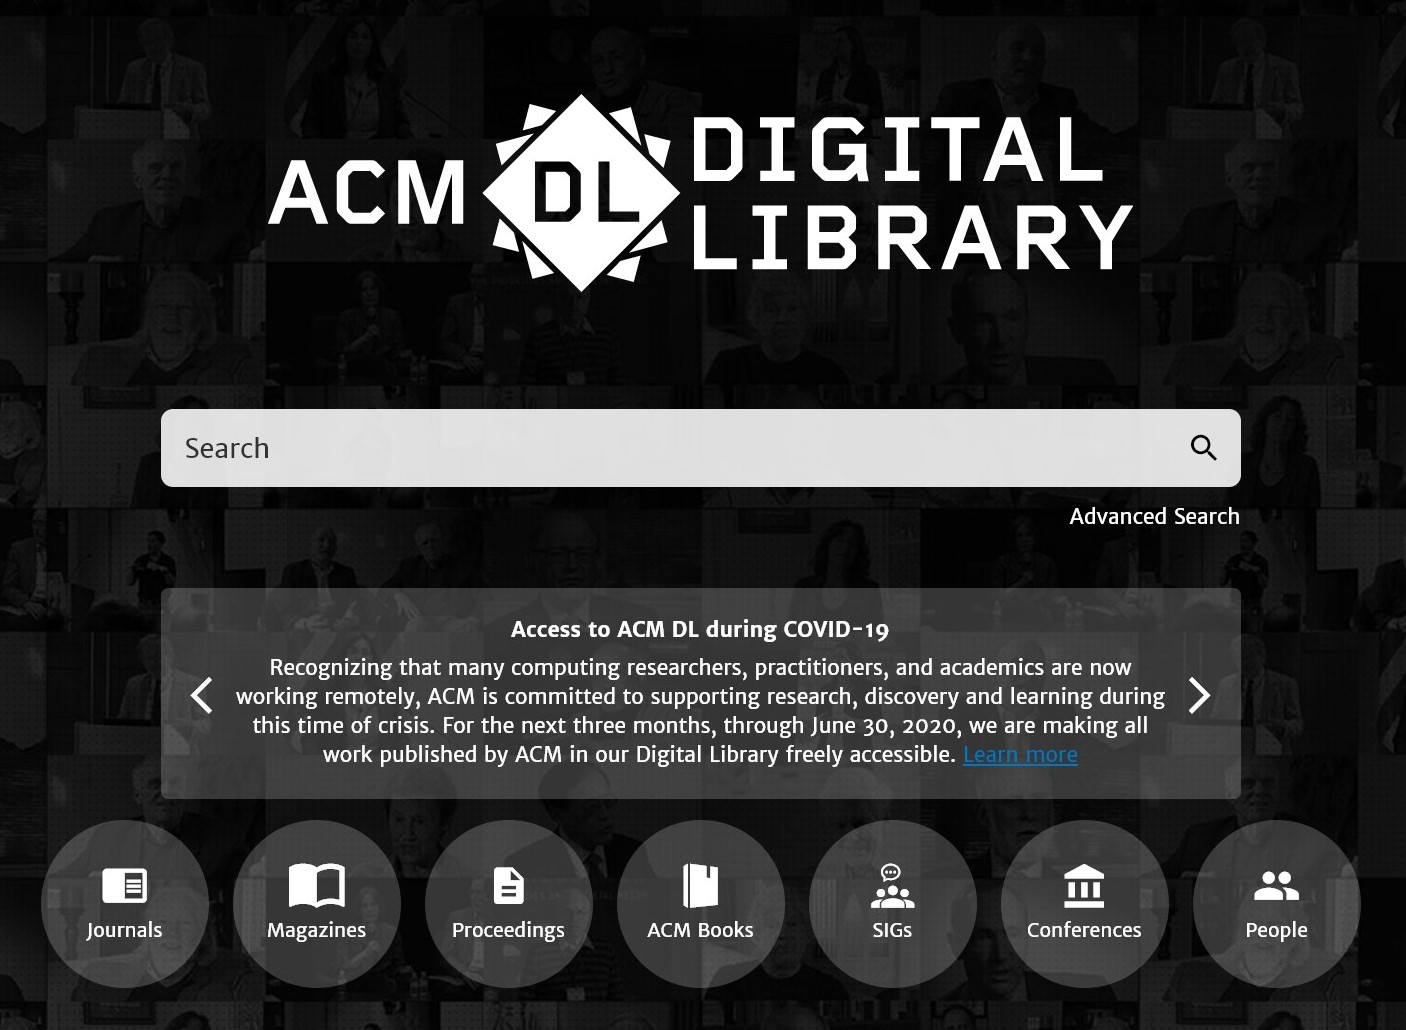 ACM ACM opens free access to Digital Library for all till 06/30/2020